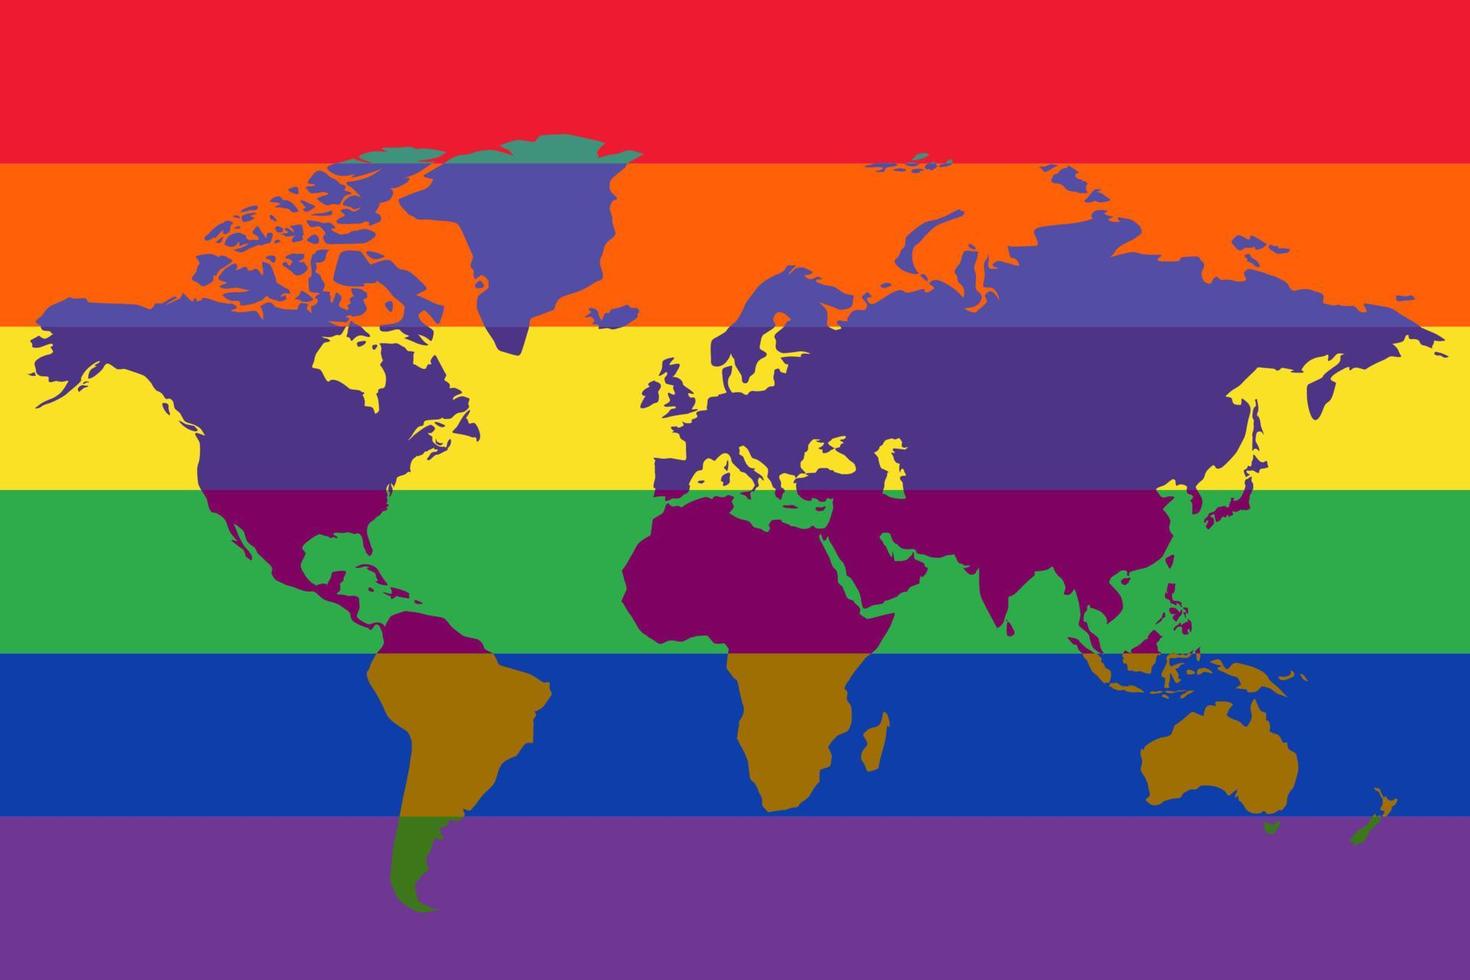 World map supporting Lgbt community vector illustration. Vector icon. World silhouette map.